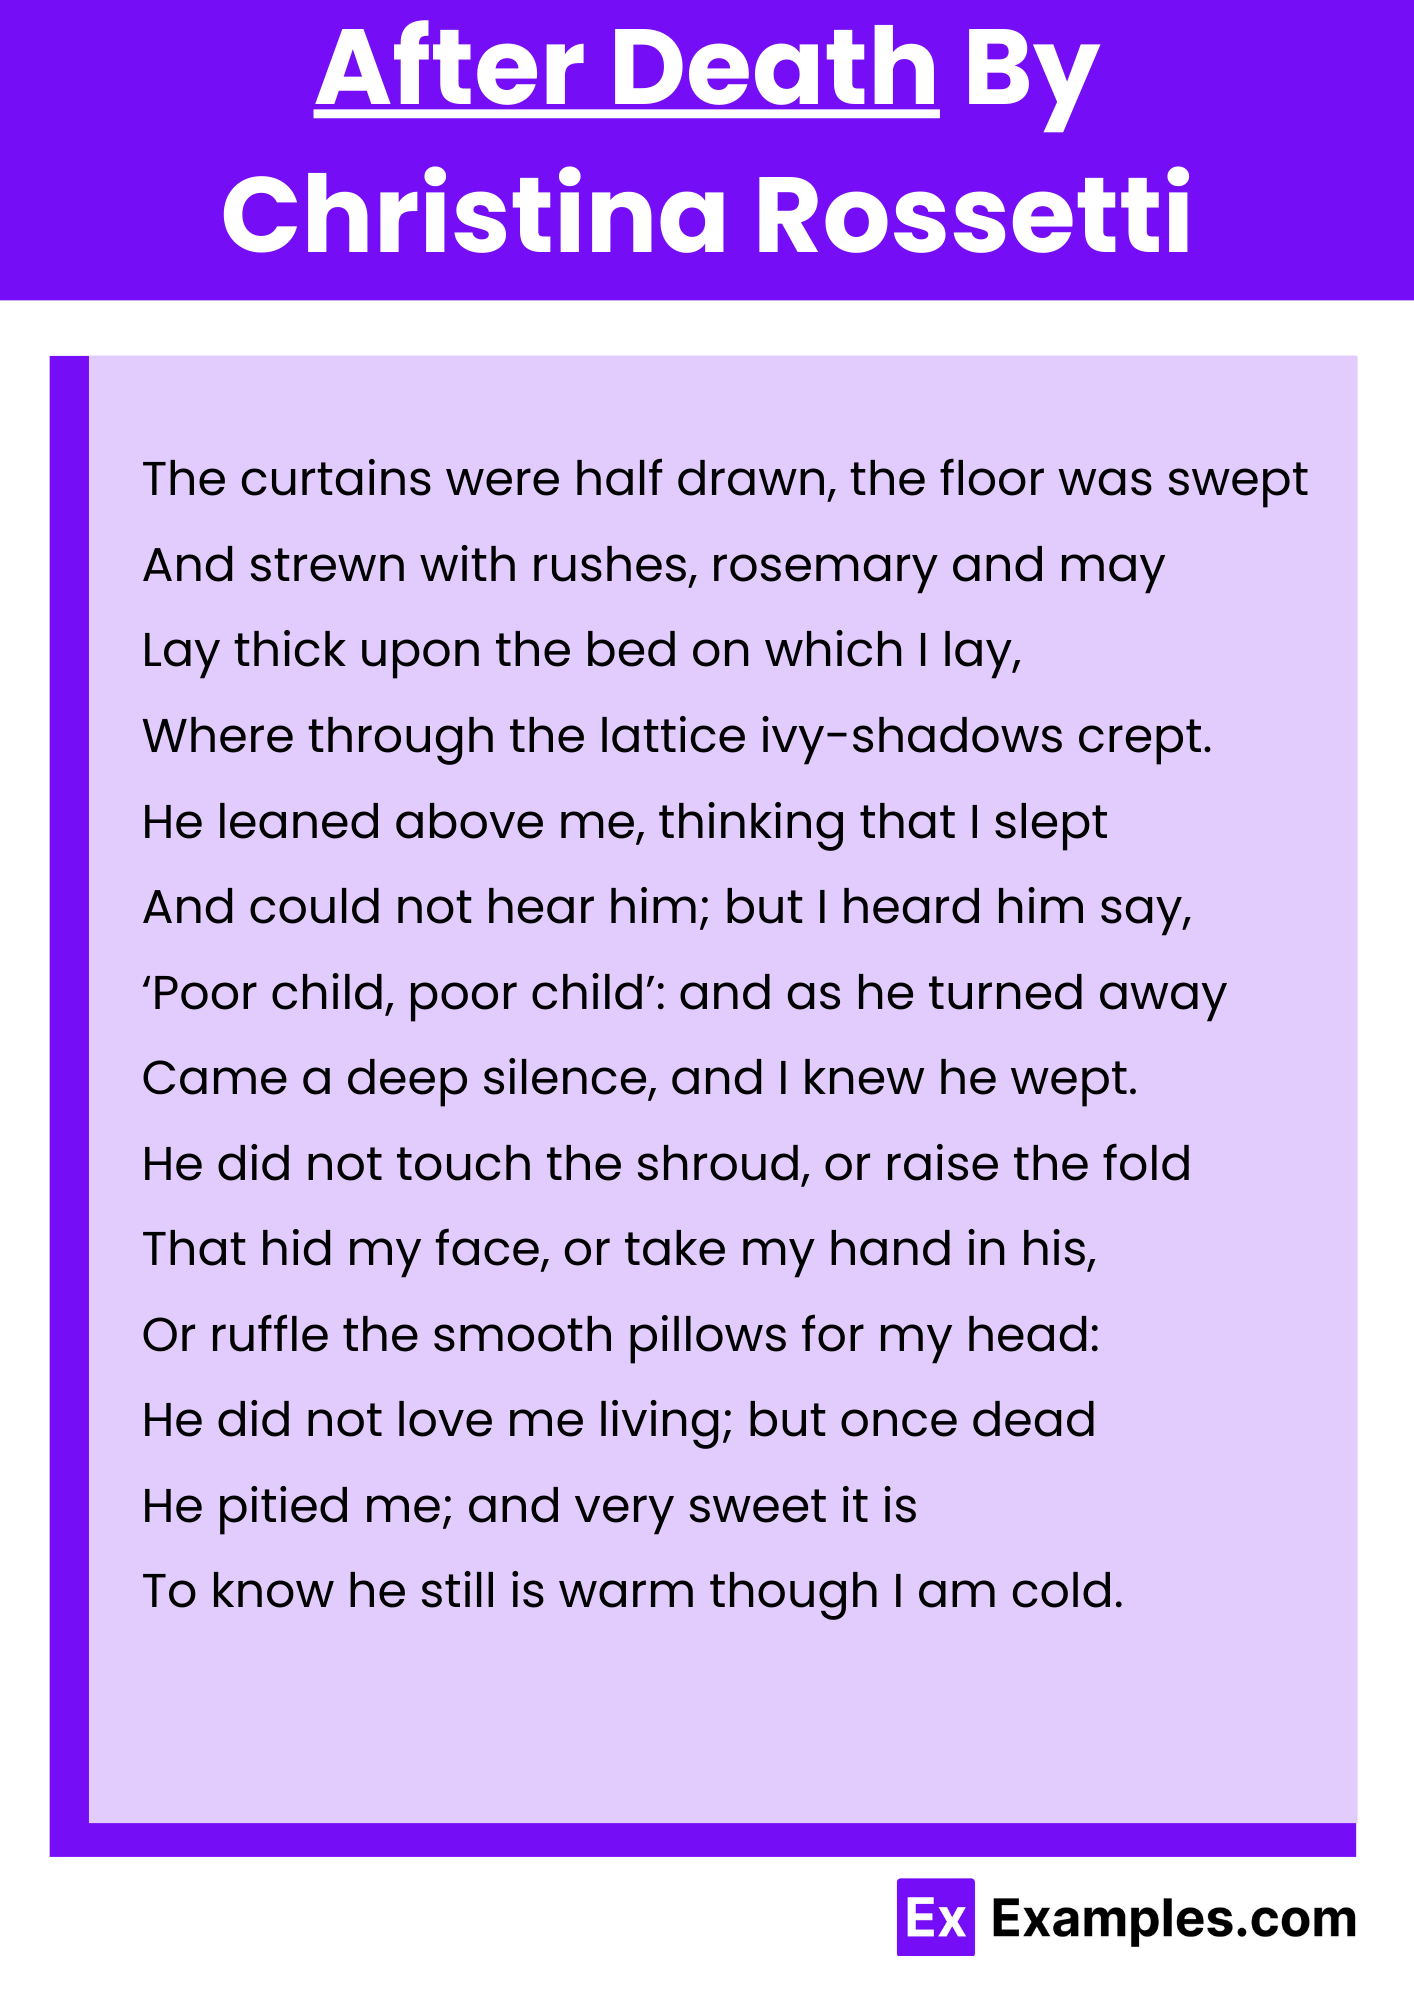 After Death By Christina Rossetti